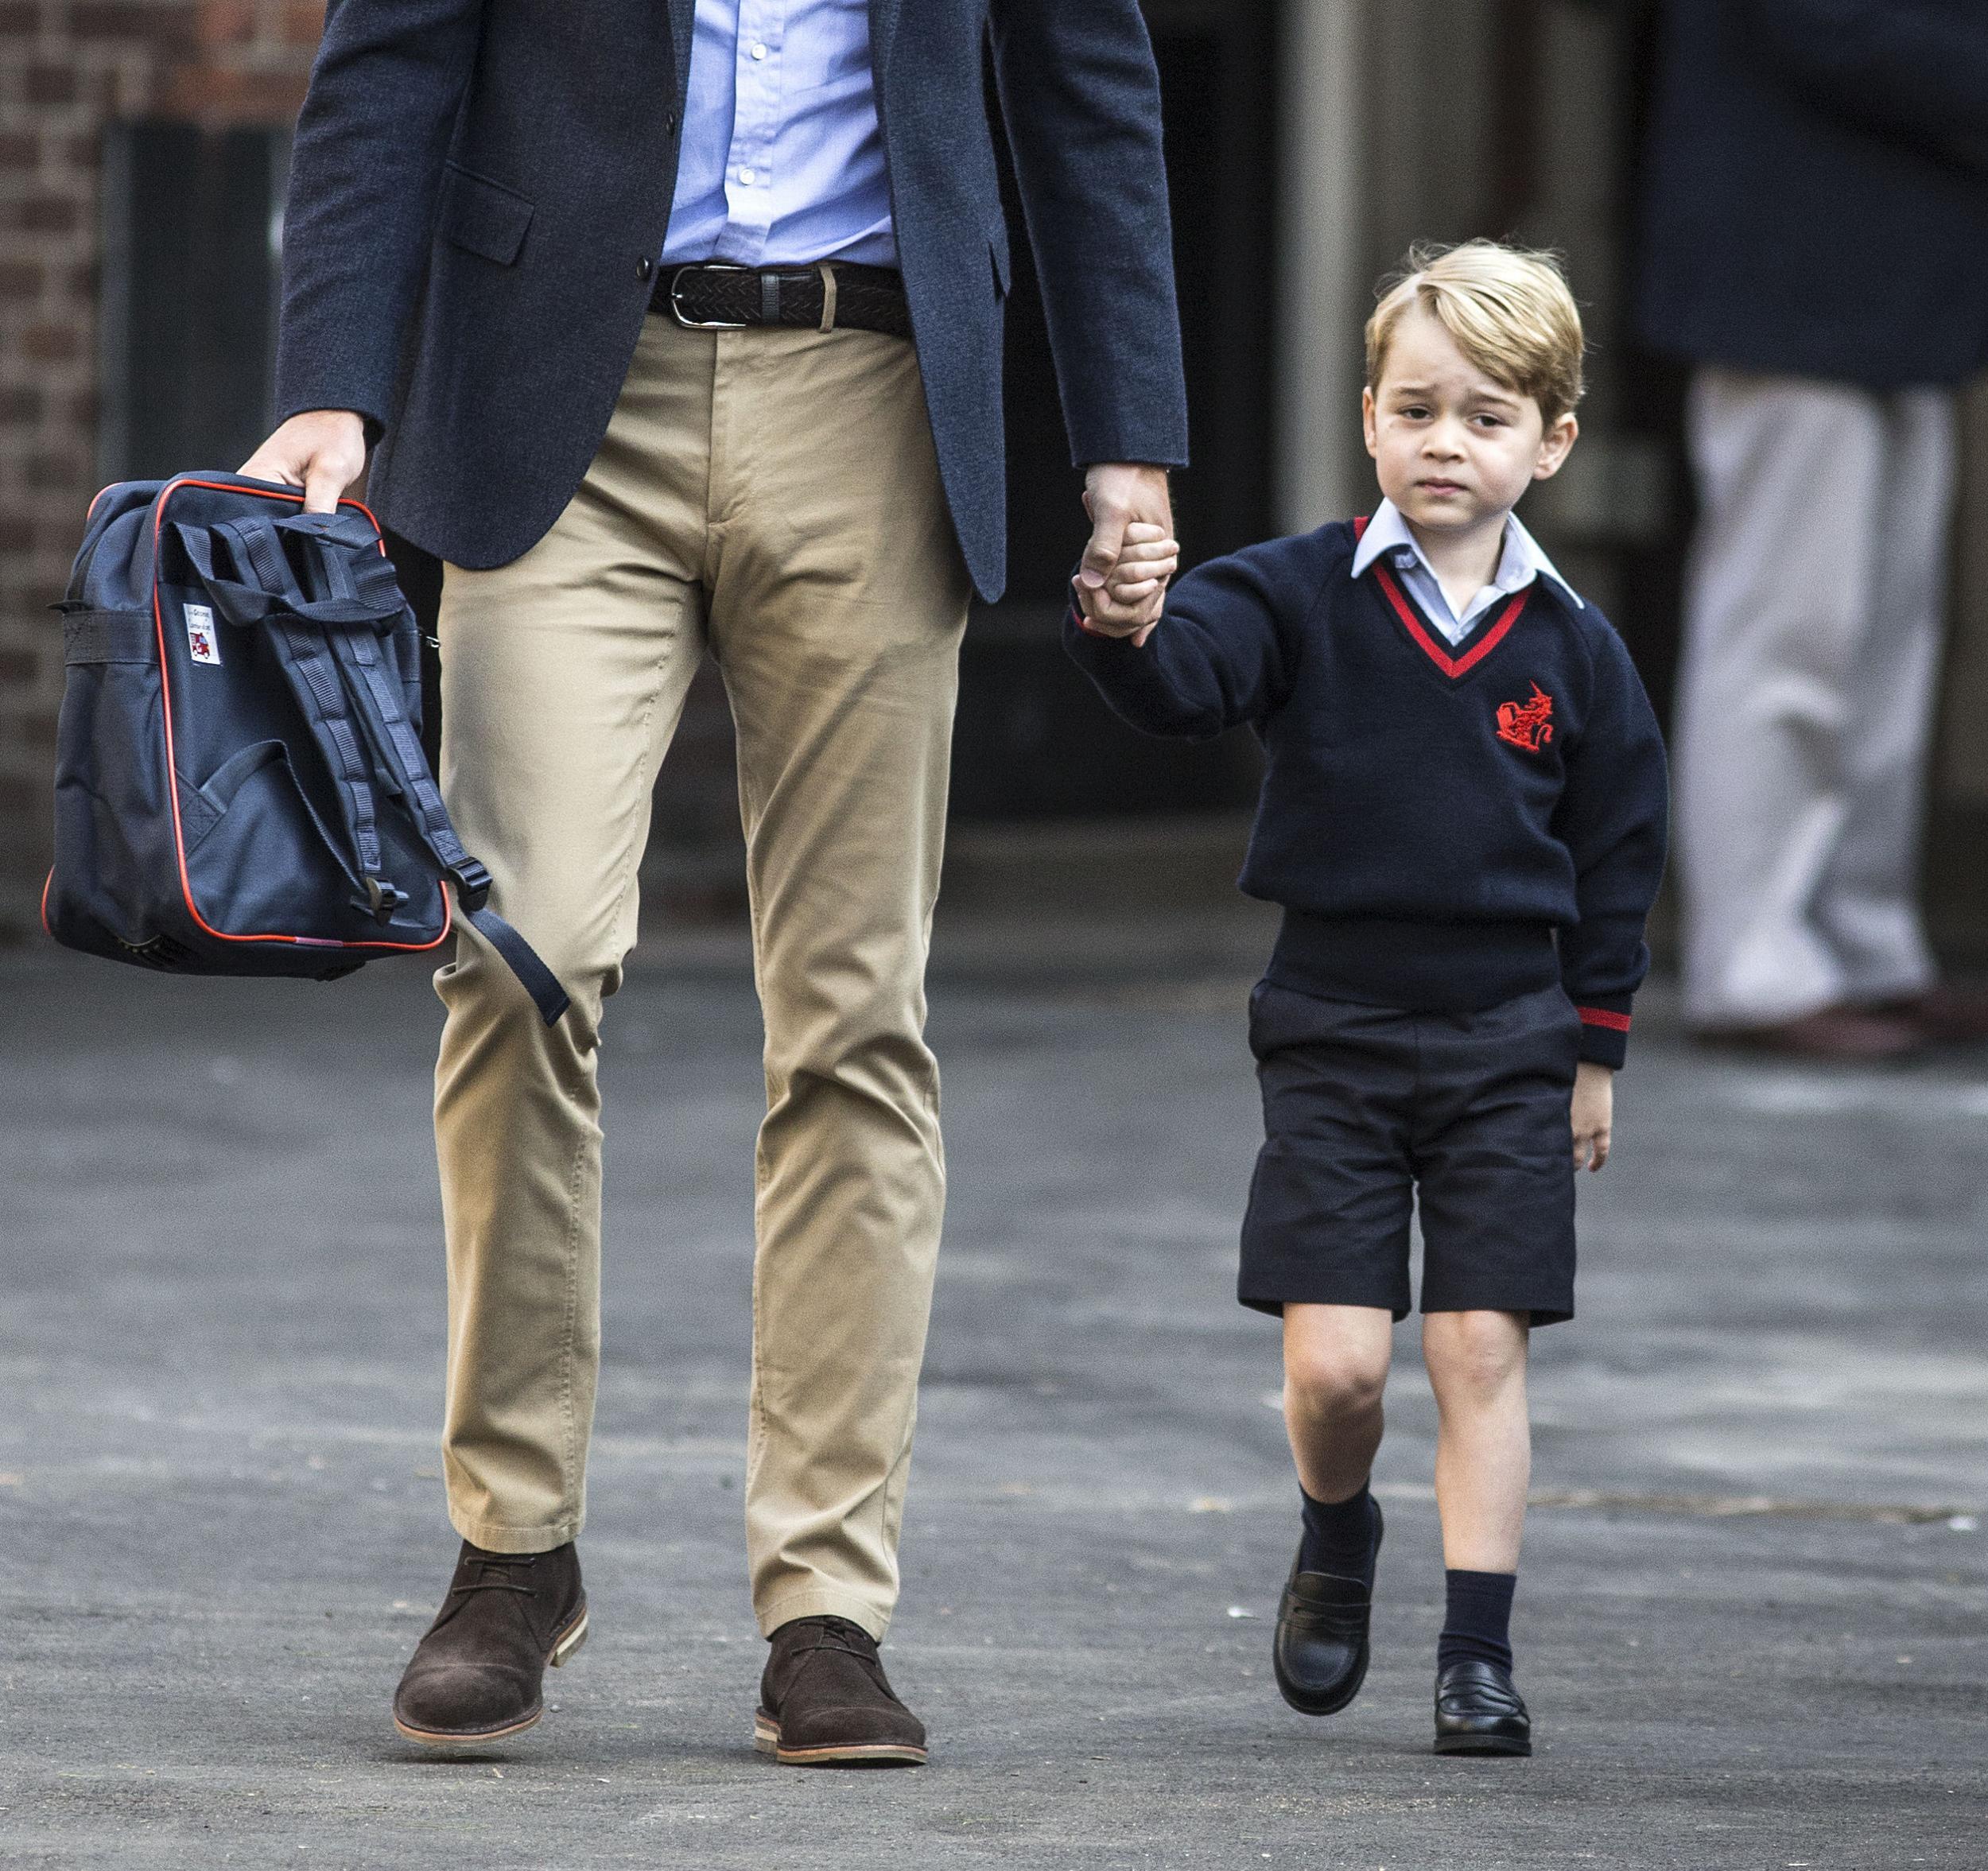 Prince George arriving for his first day at Battersea school, accompanied by his father